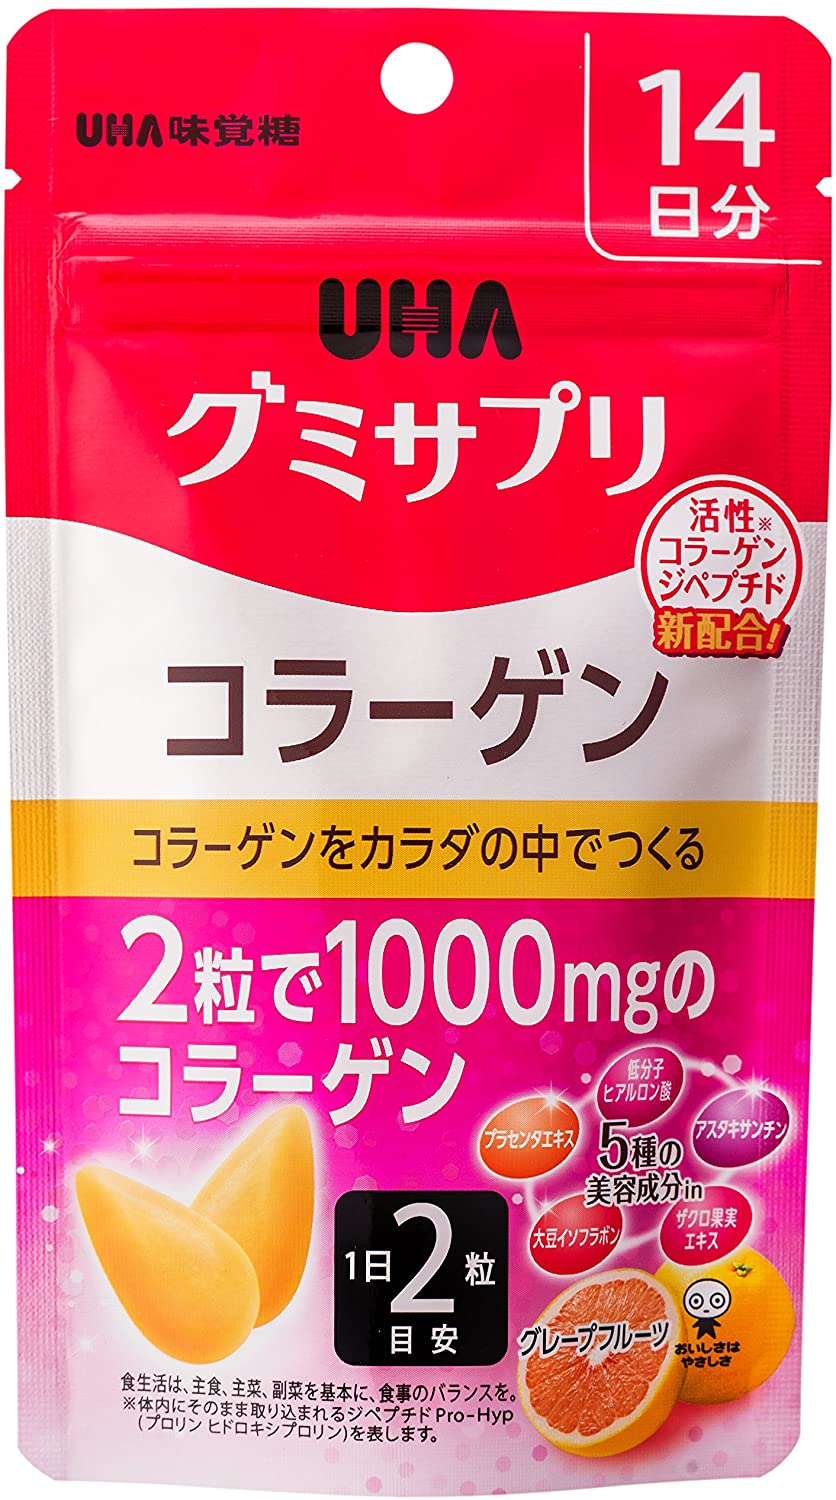 UHA Gummy Supplement Collagen 14 Days (28 Tablets), Japan Beauty Anti-aging Youthful Radiant Skin